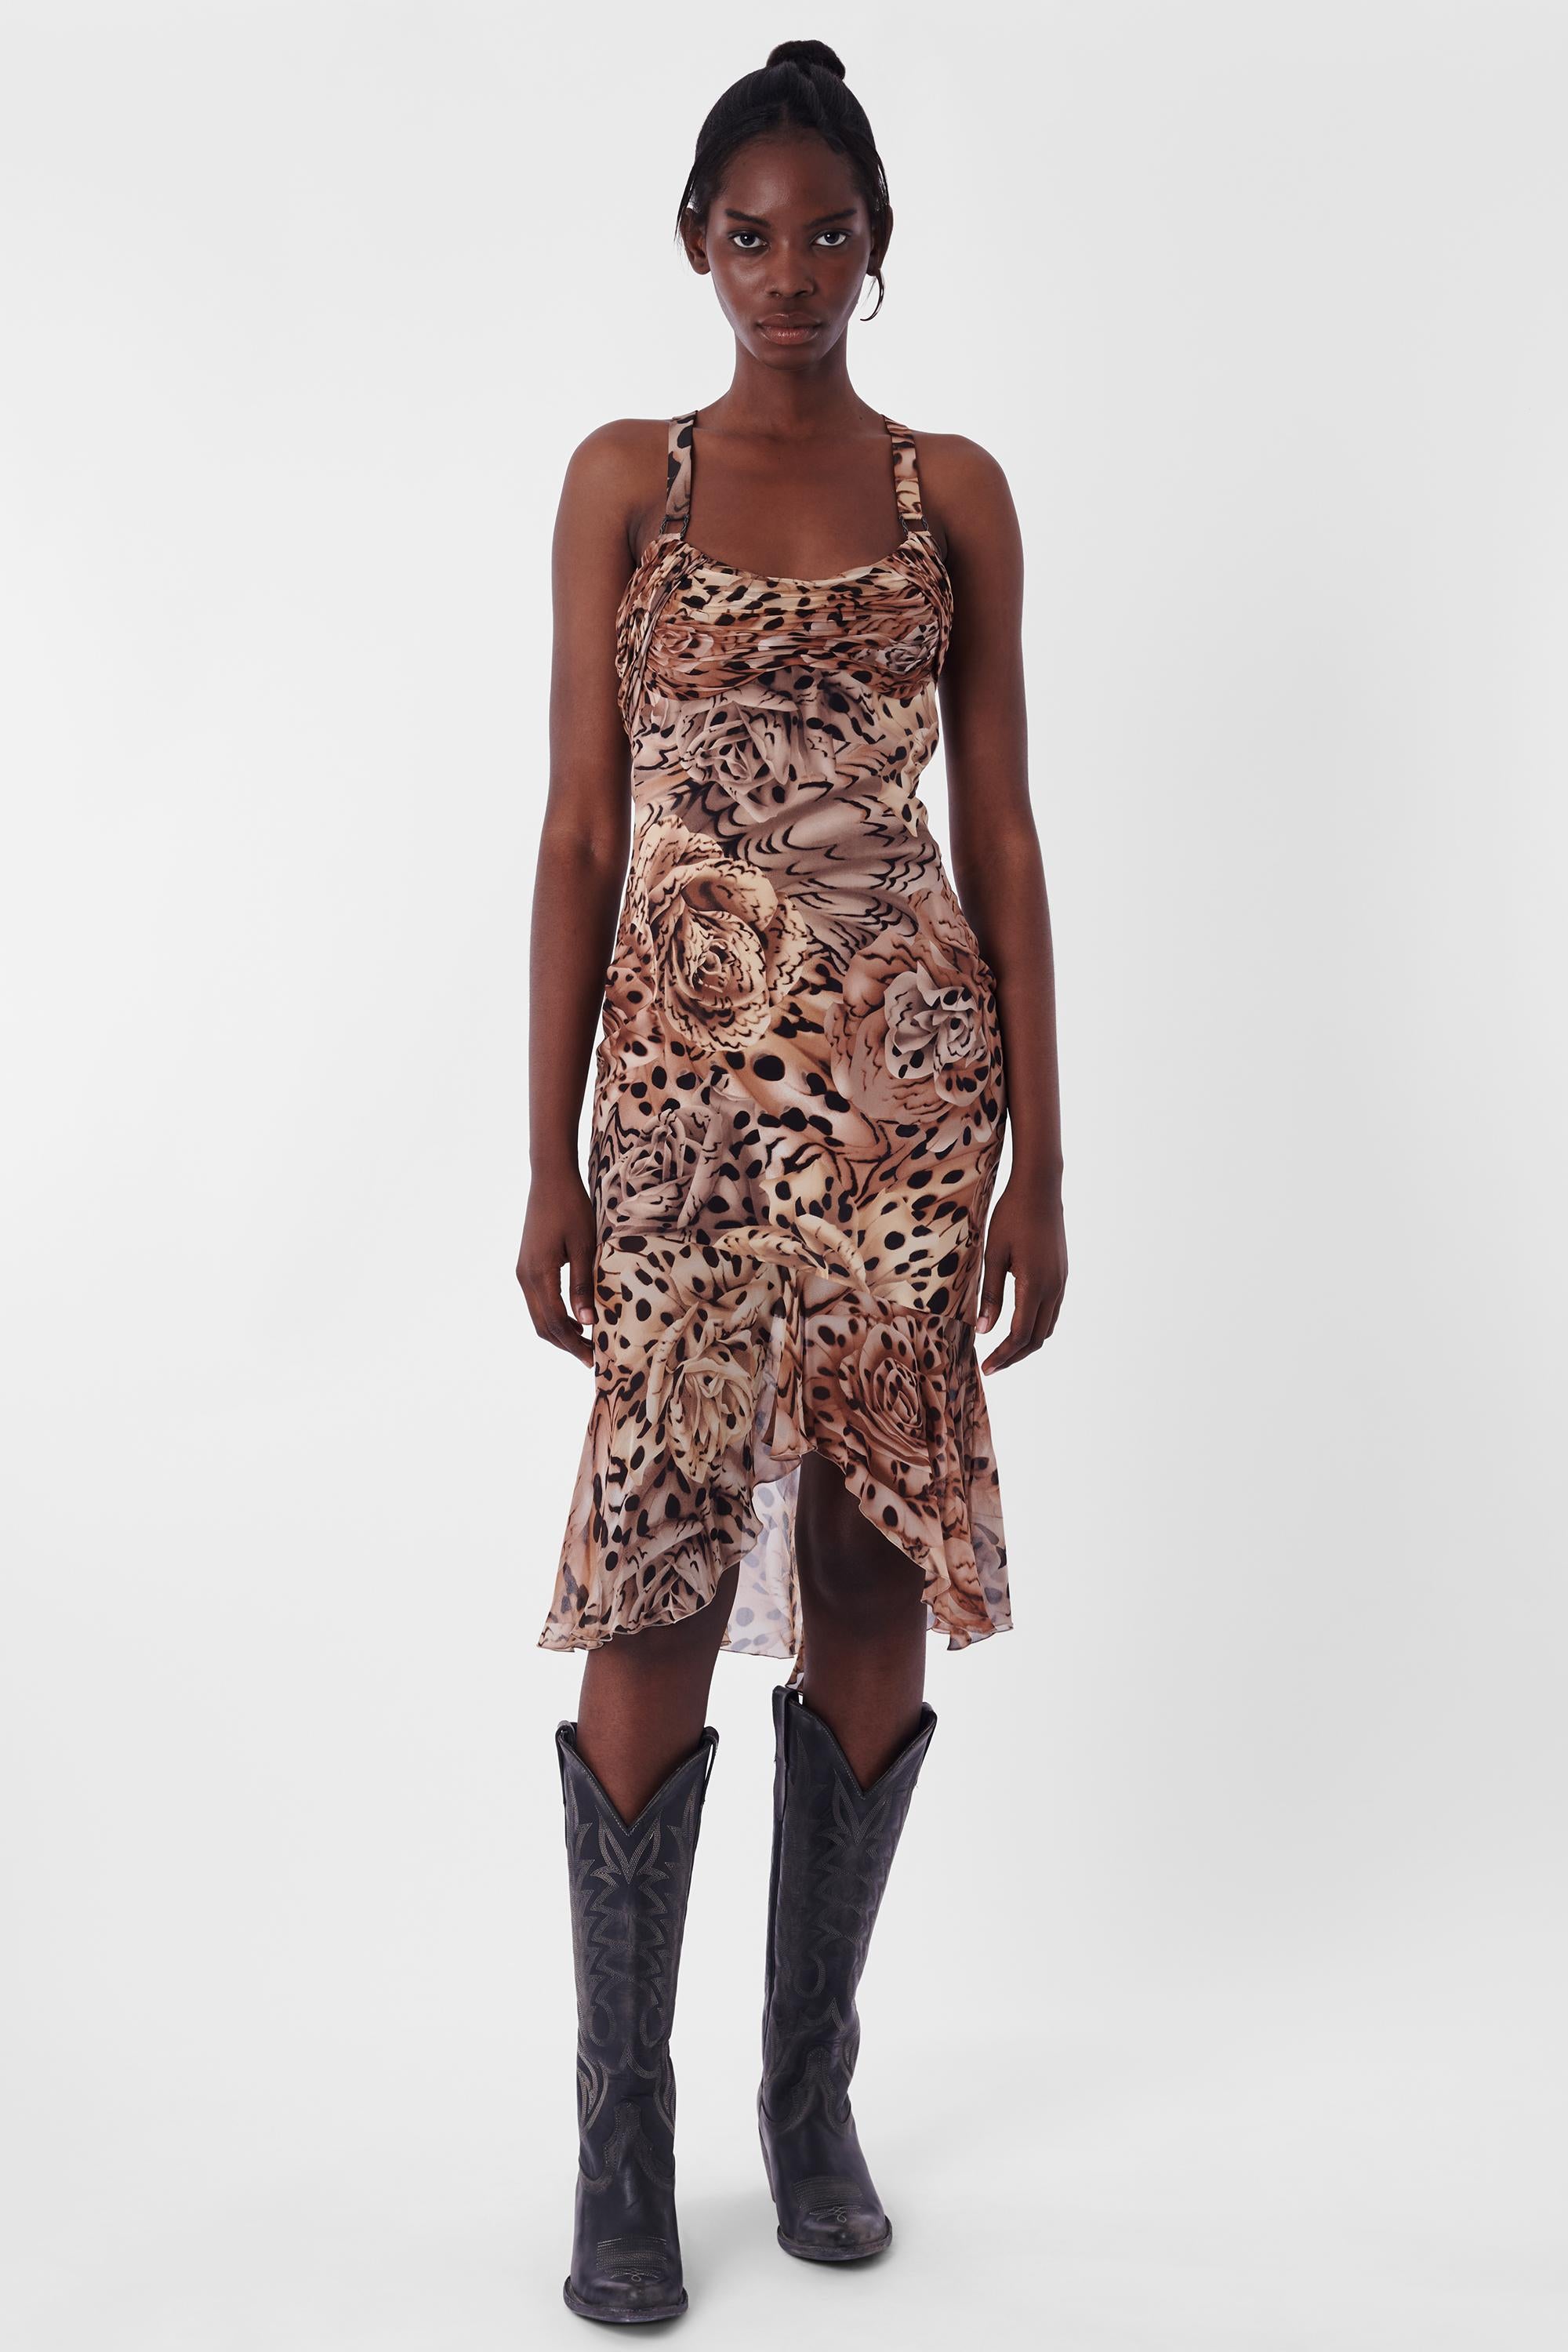 Versace F/W 2003 Leopard Cross Back Dress In Good Condition For Sale In London, GB